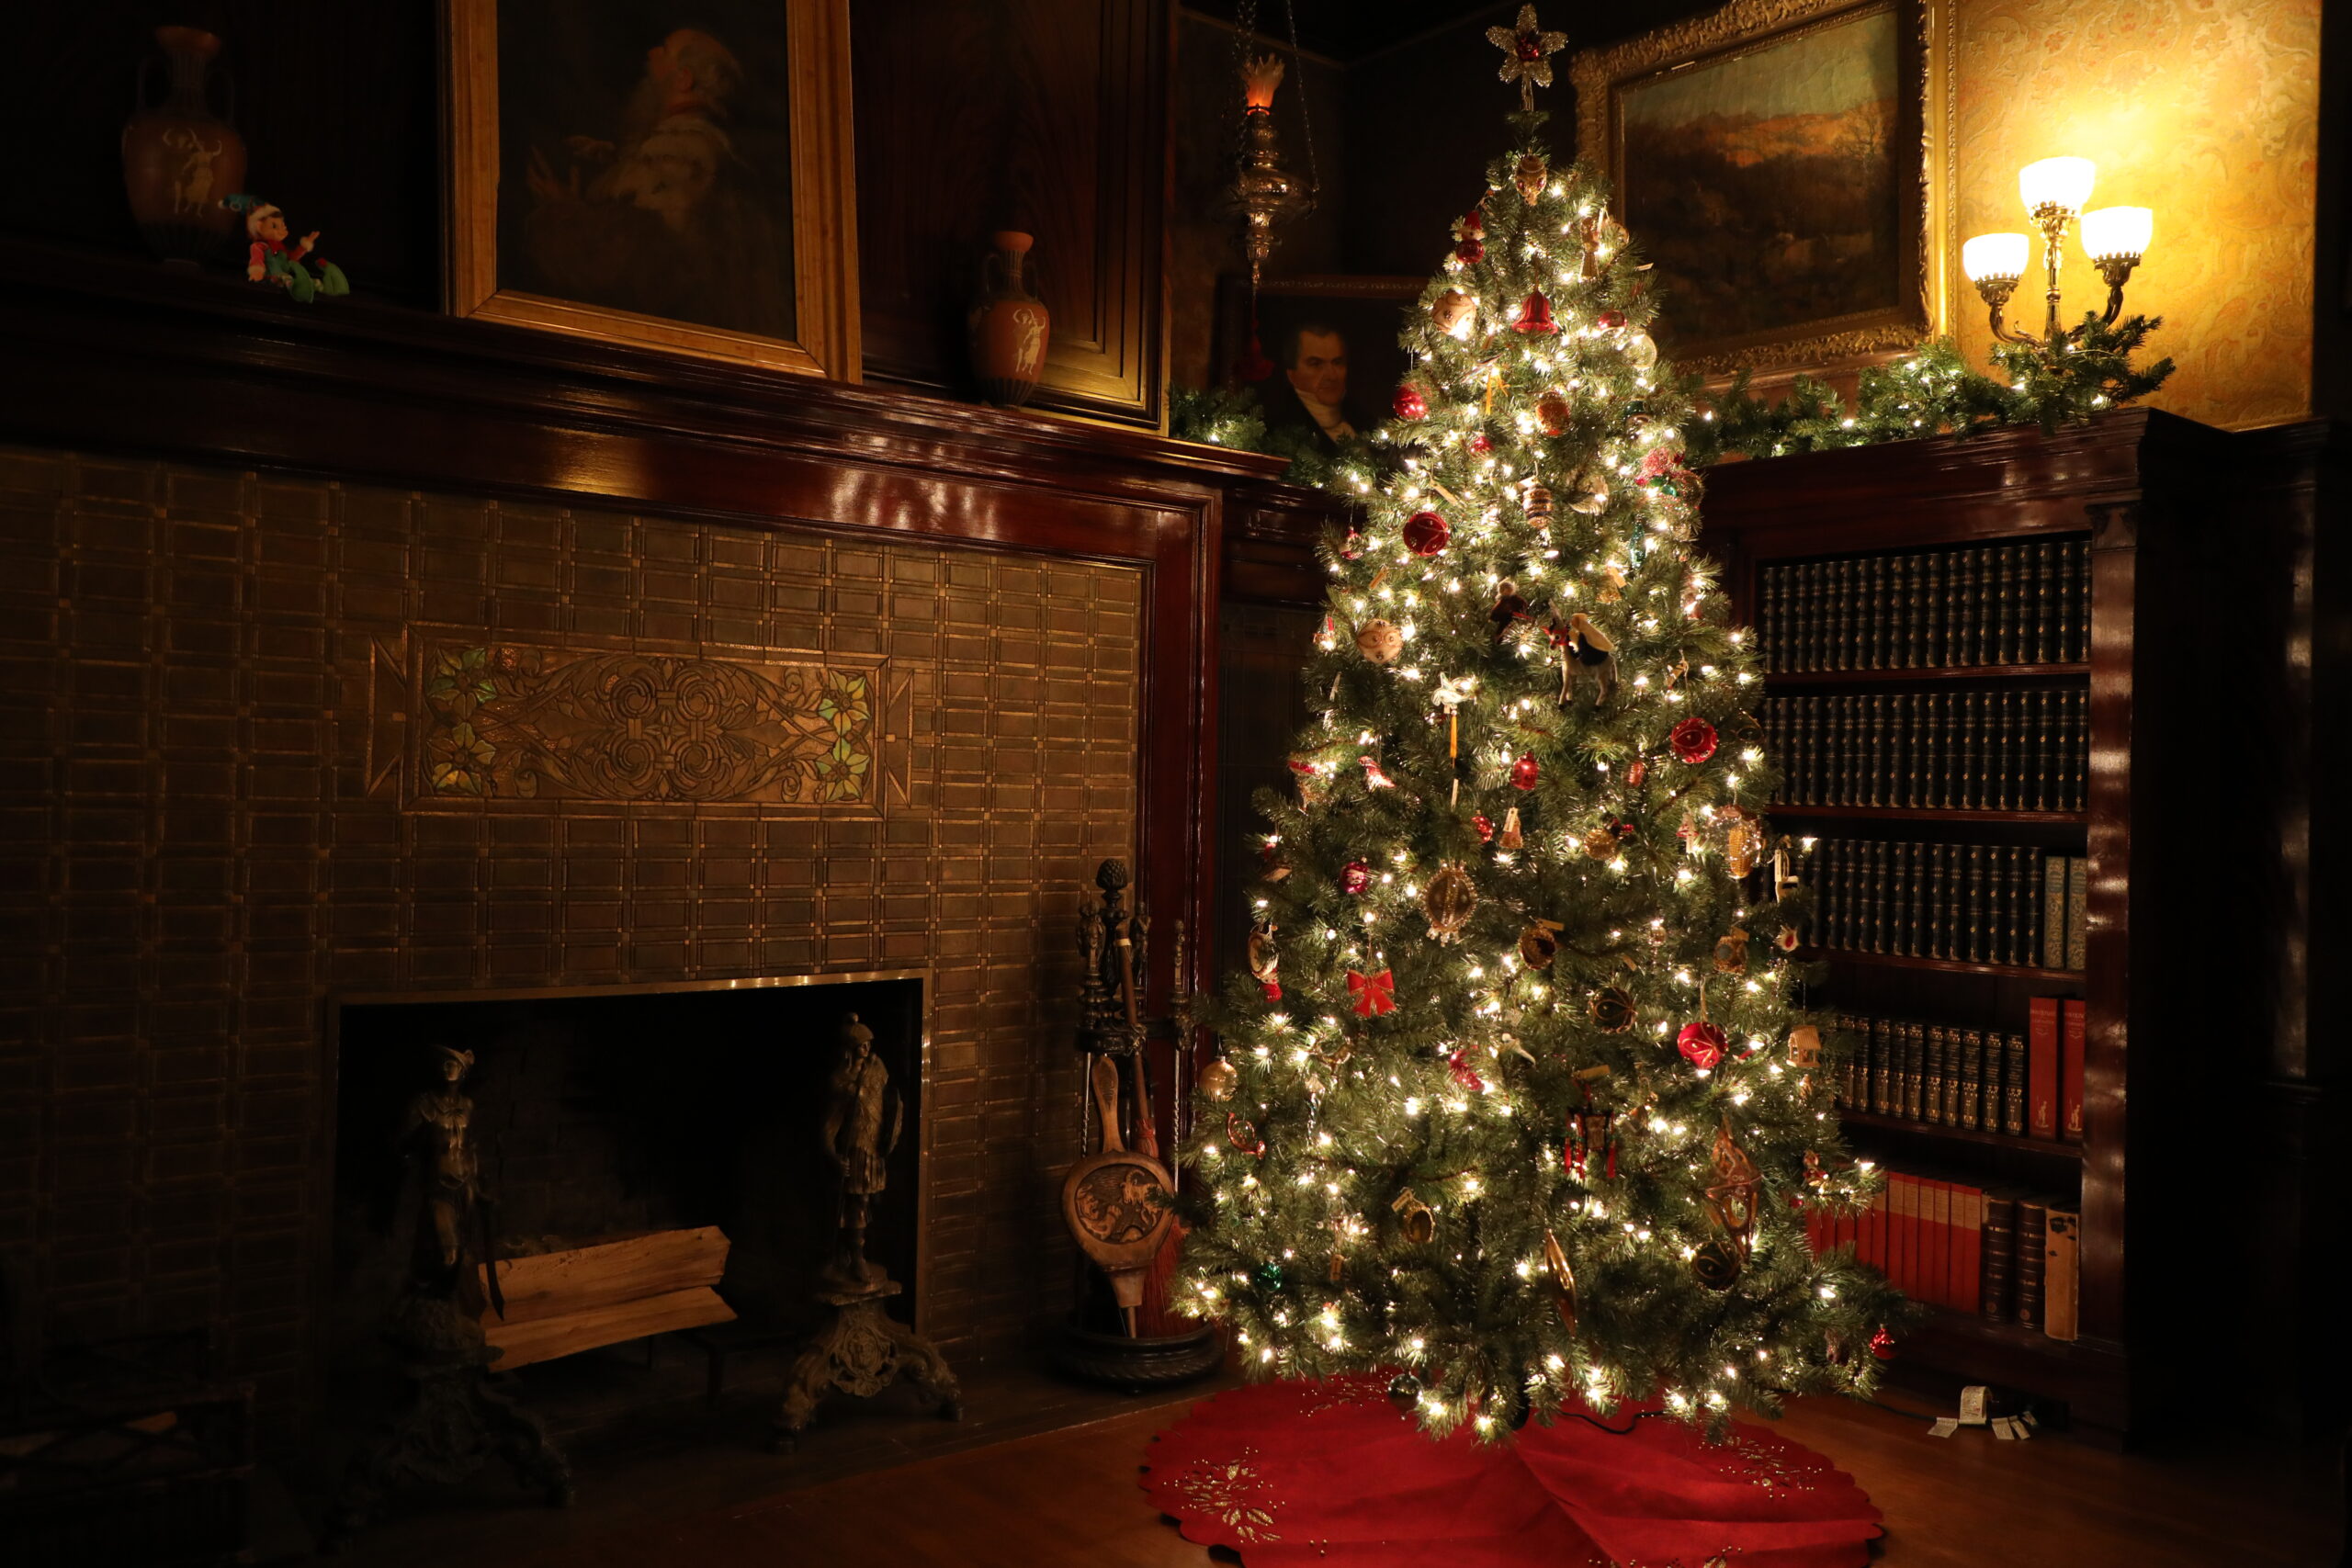 A green Christmas tree stands in front of a fireplace with a red skirt on the ground and lights on the tree lit up white.